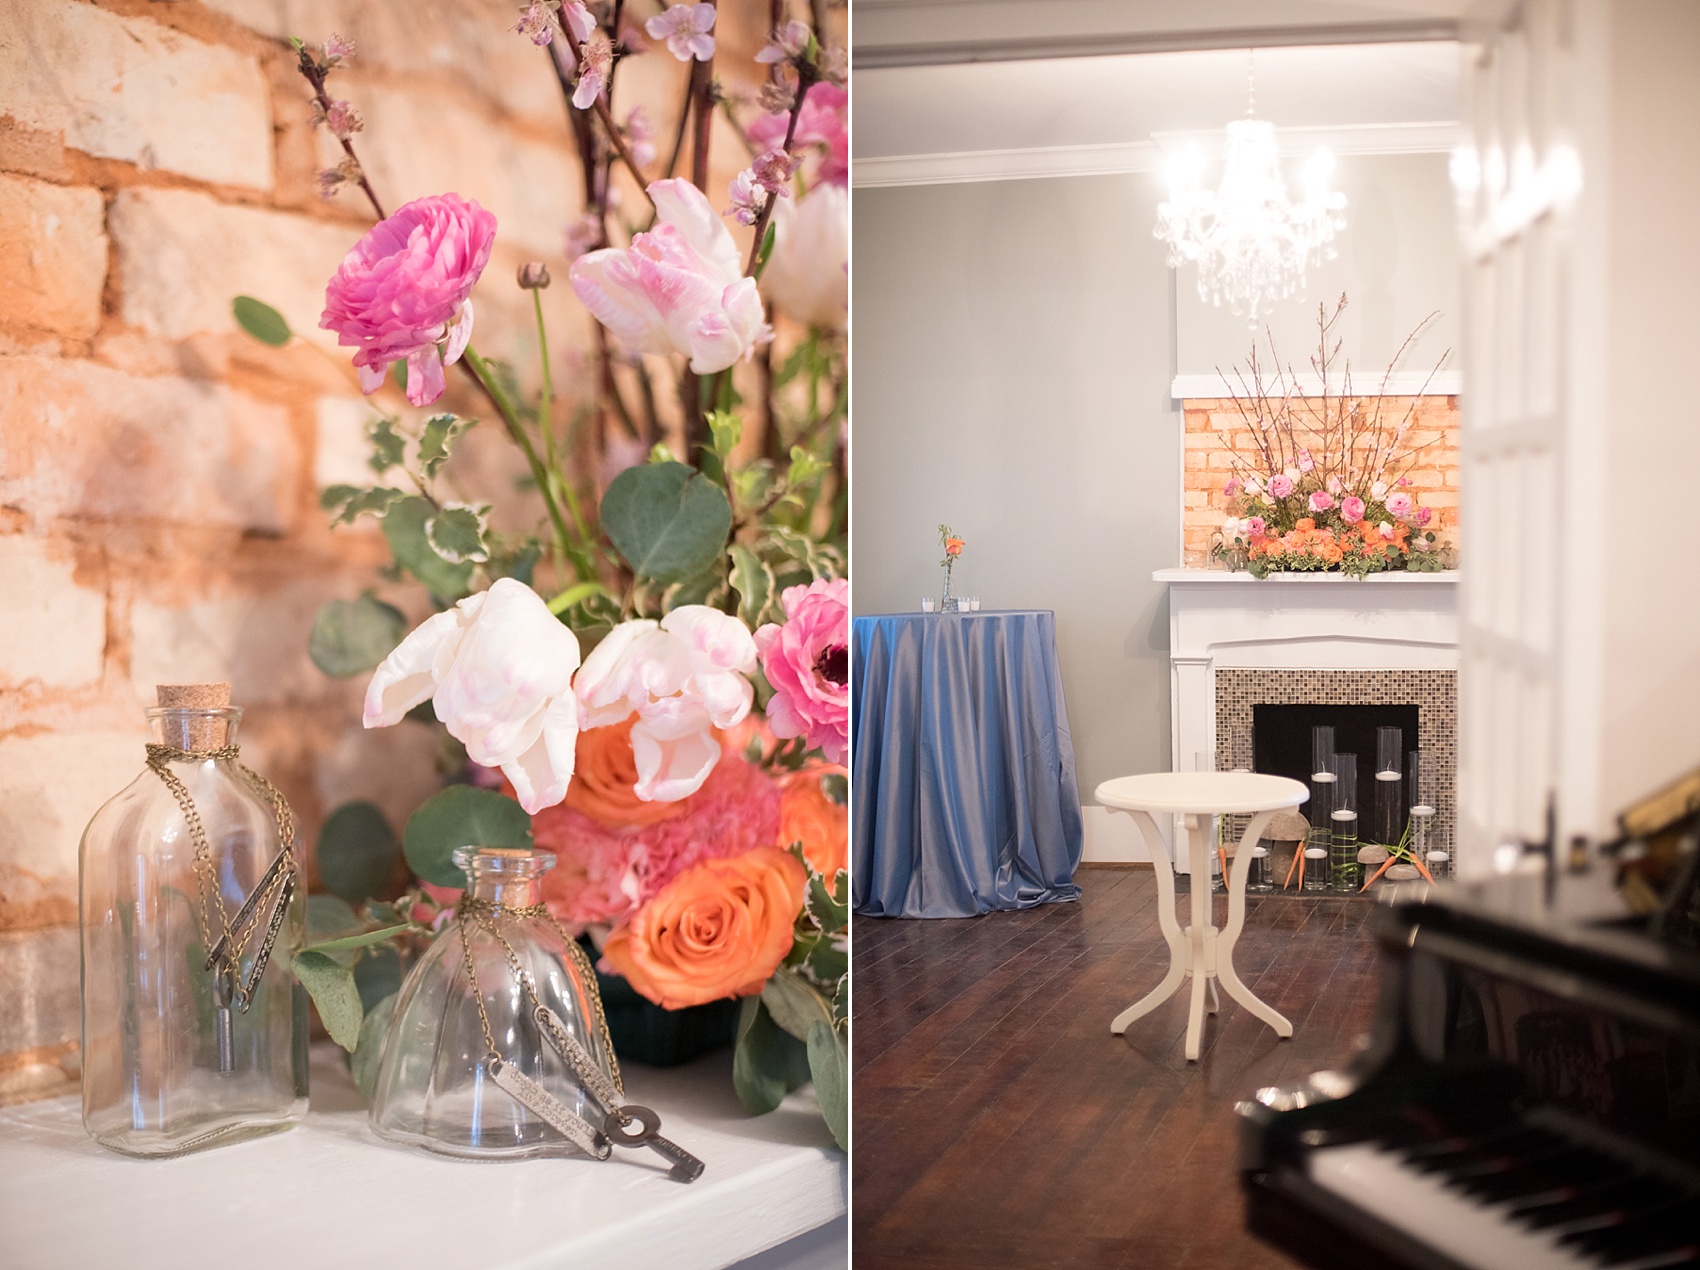 Raleigh wedding photographer Mikkel Paige captures Mim's House opening night, with an Alice in Wonderland theme and floral arrangements by Eclectic Sage.